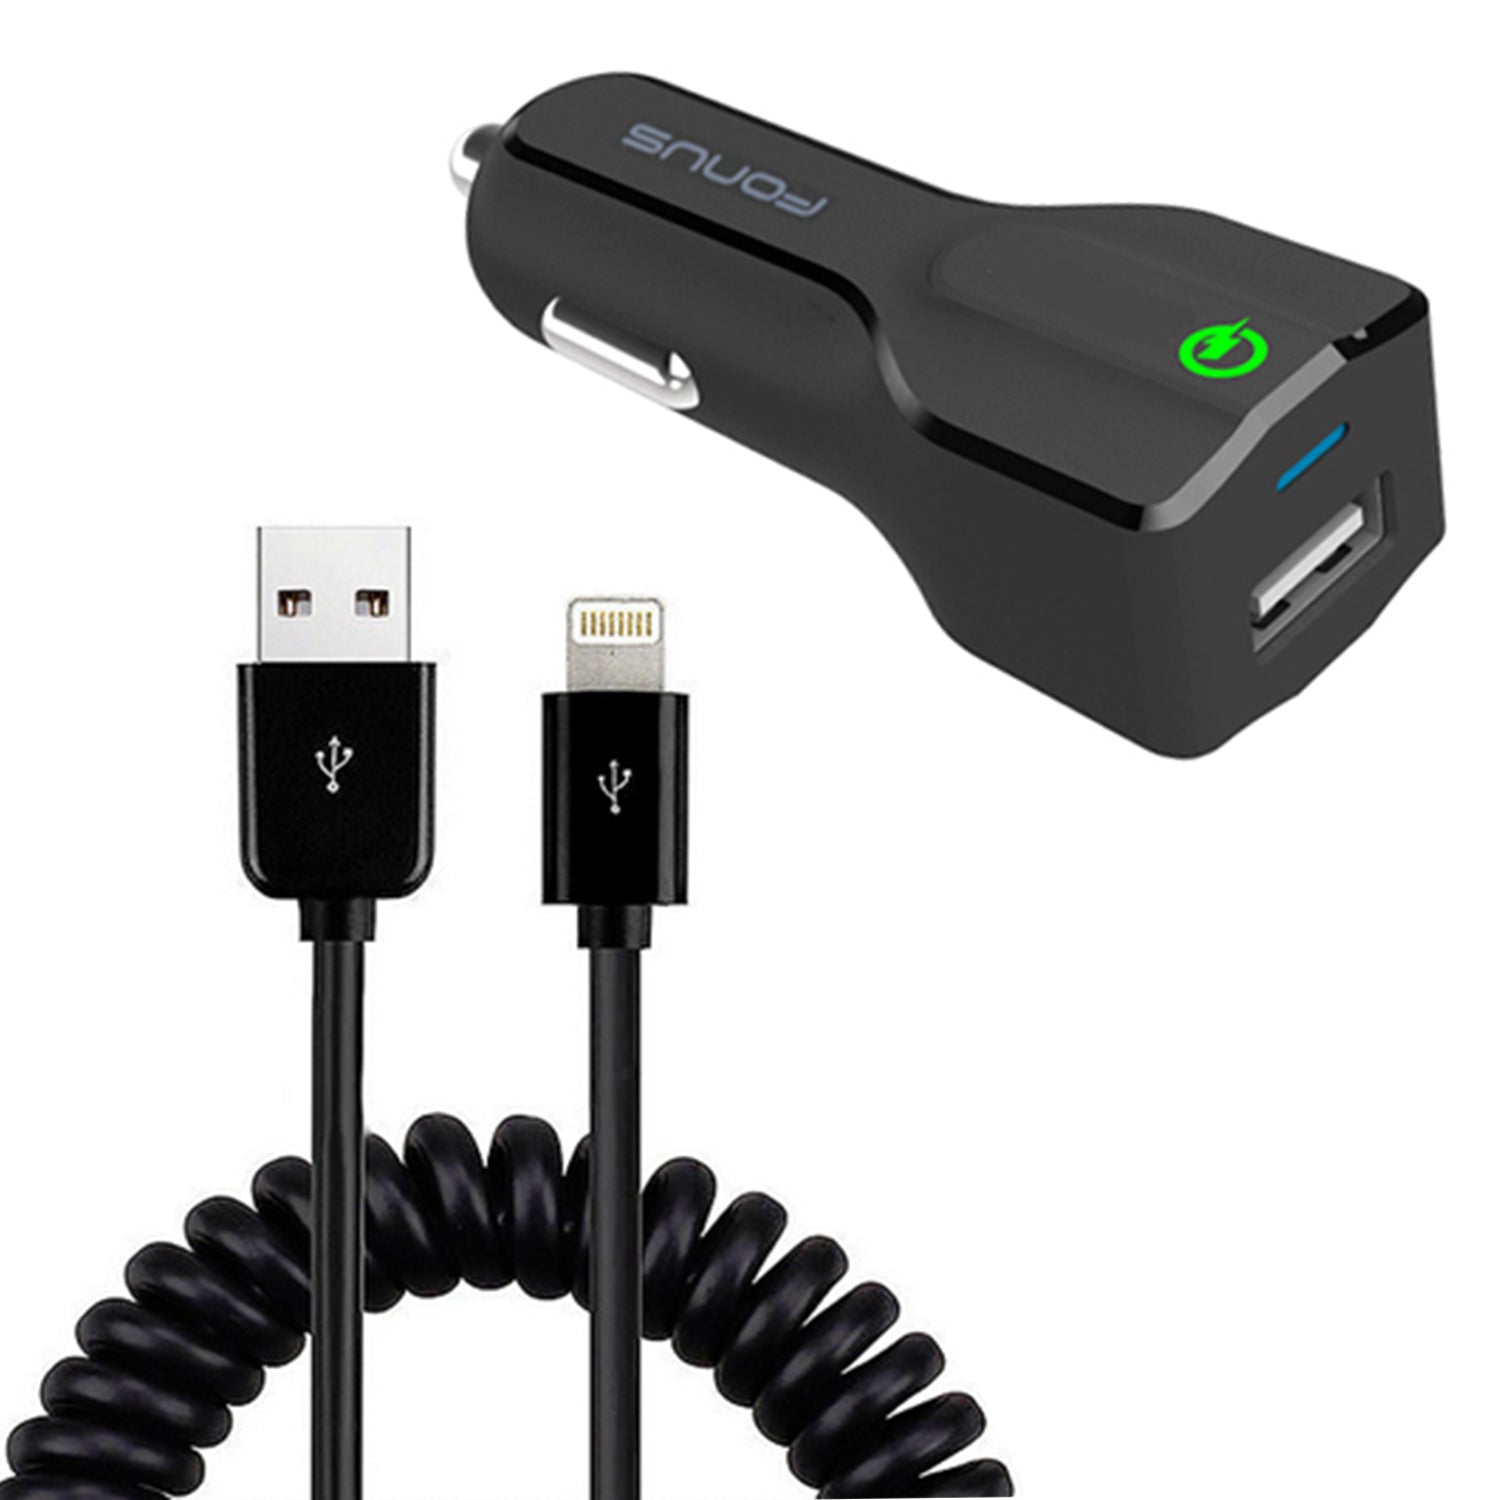 Car Charger, Coiled Cable 2-Port USB 24W Fast - ACK23